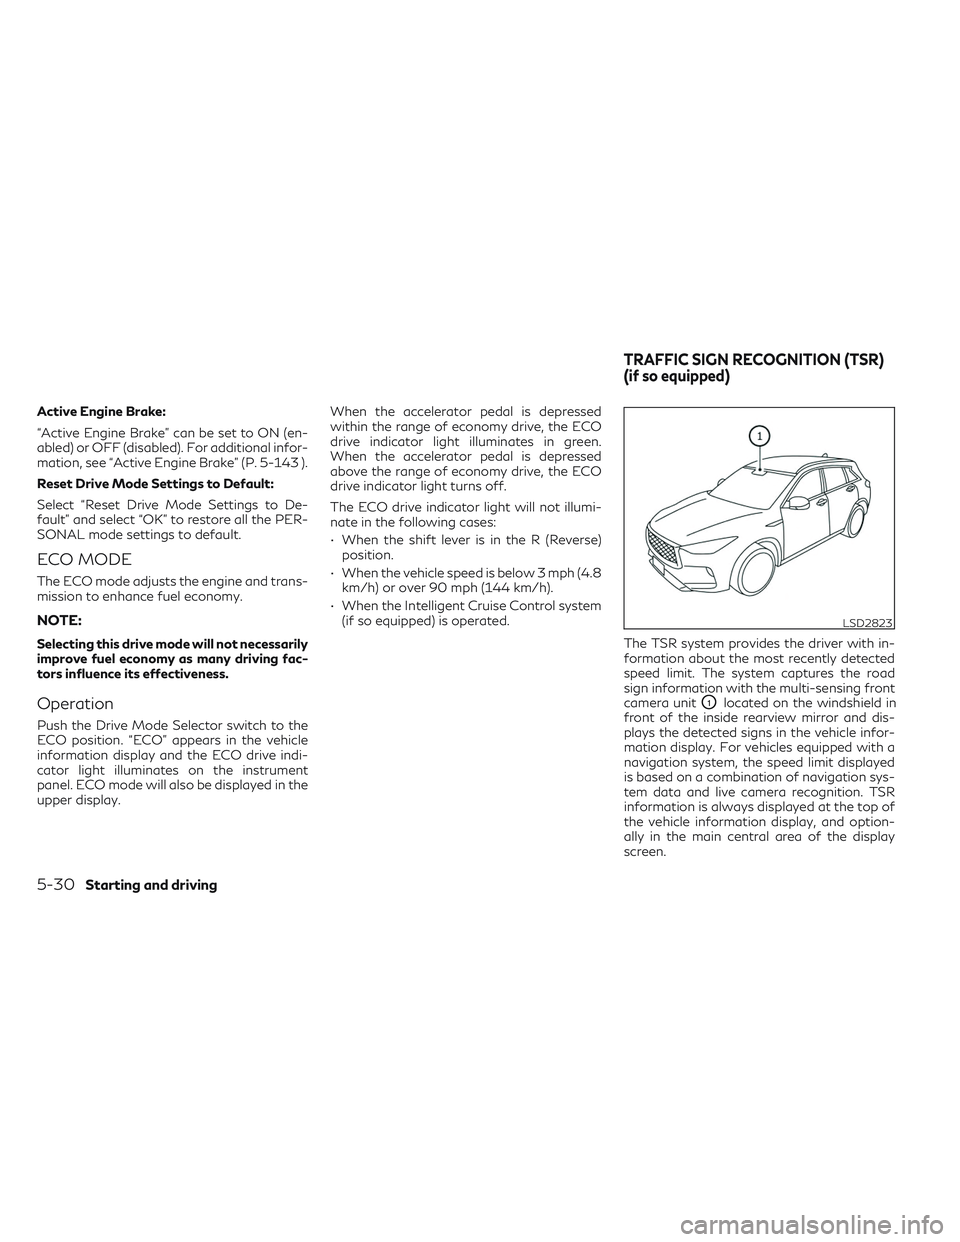 INFINITI QX50 2022  Owners Manual Active Engine Brake:
“Active Engine Brake” can be set to ON (en-
abled) or OFF (disabled). For additional infor-
mation, see “Active Engine Brake” (P. 5-143 ).
Reset Drive Mode Settings to Def